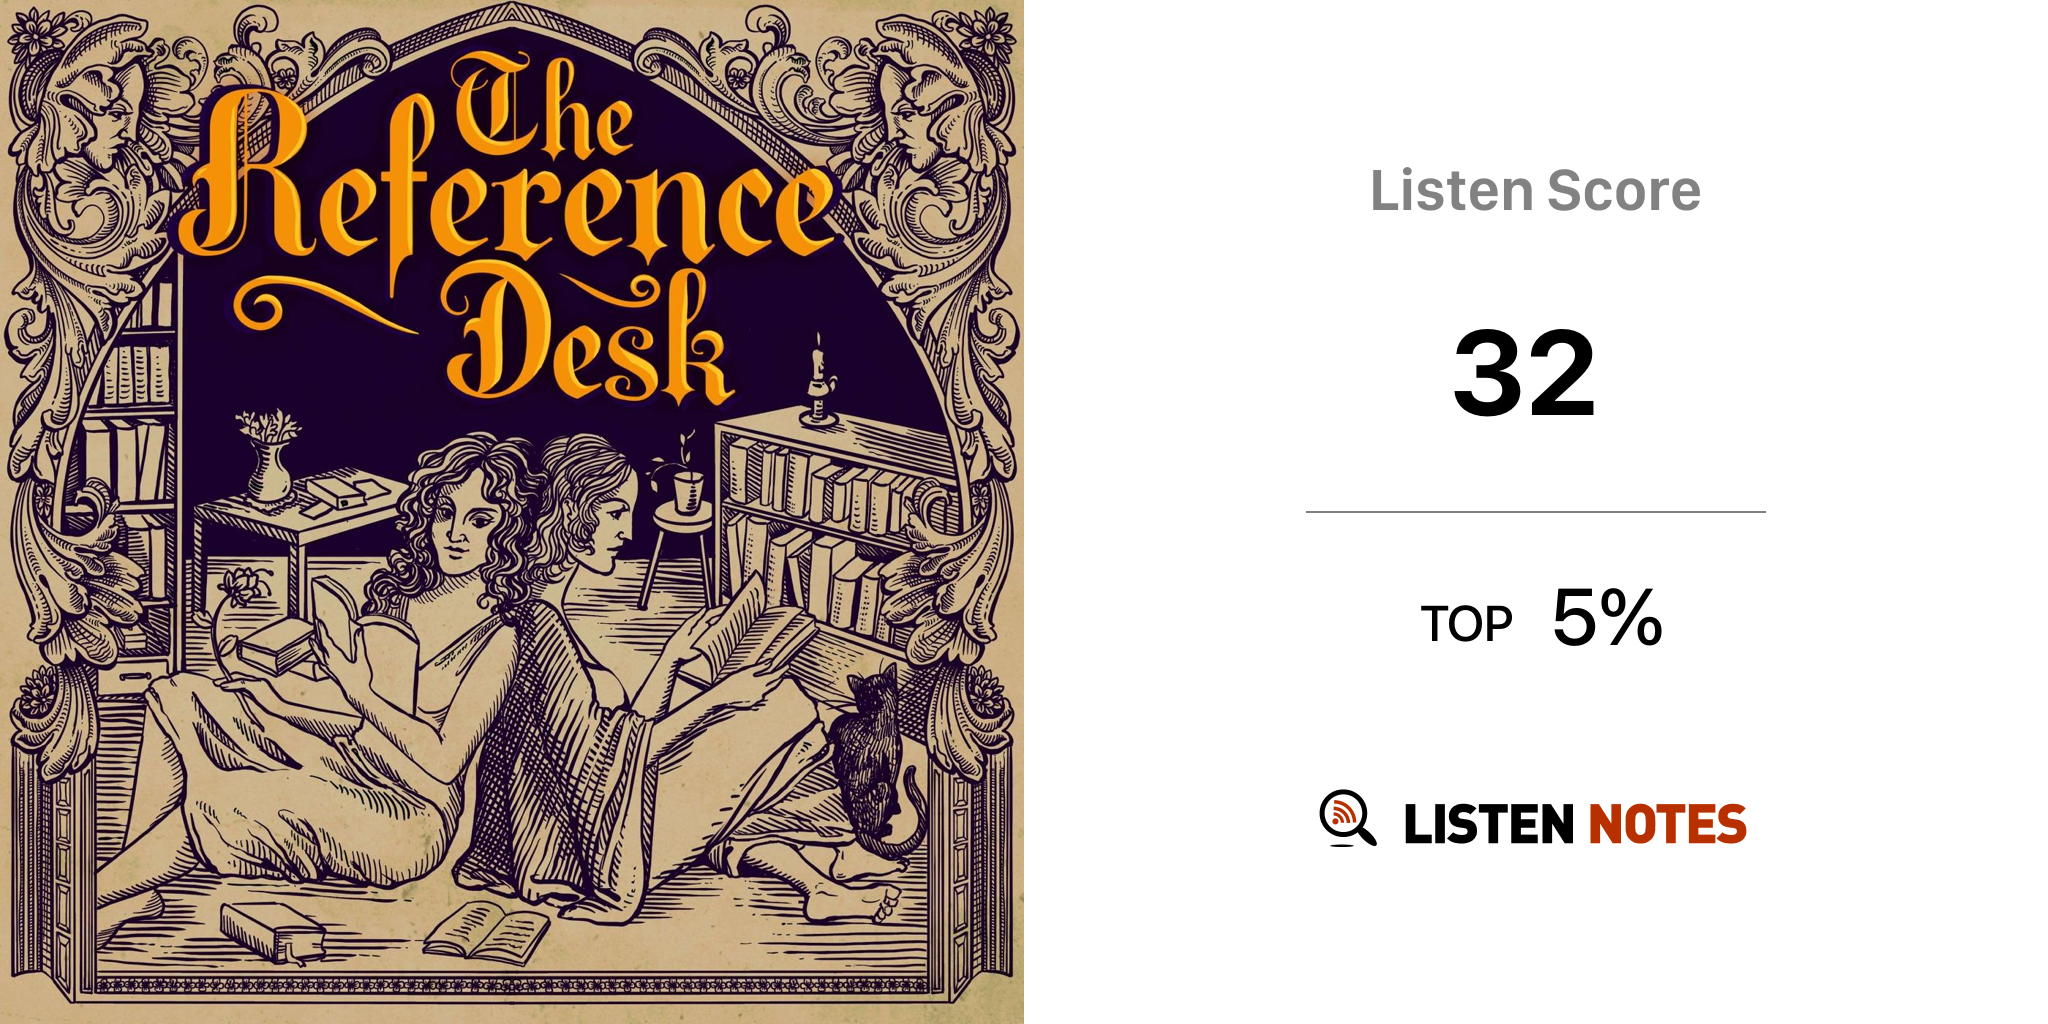 Listen to The Reference Desk podcast